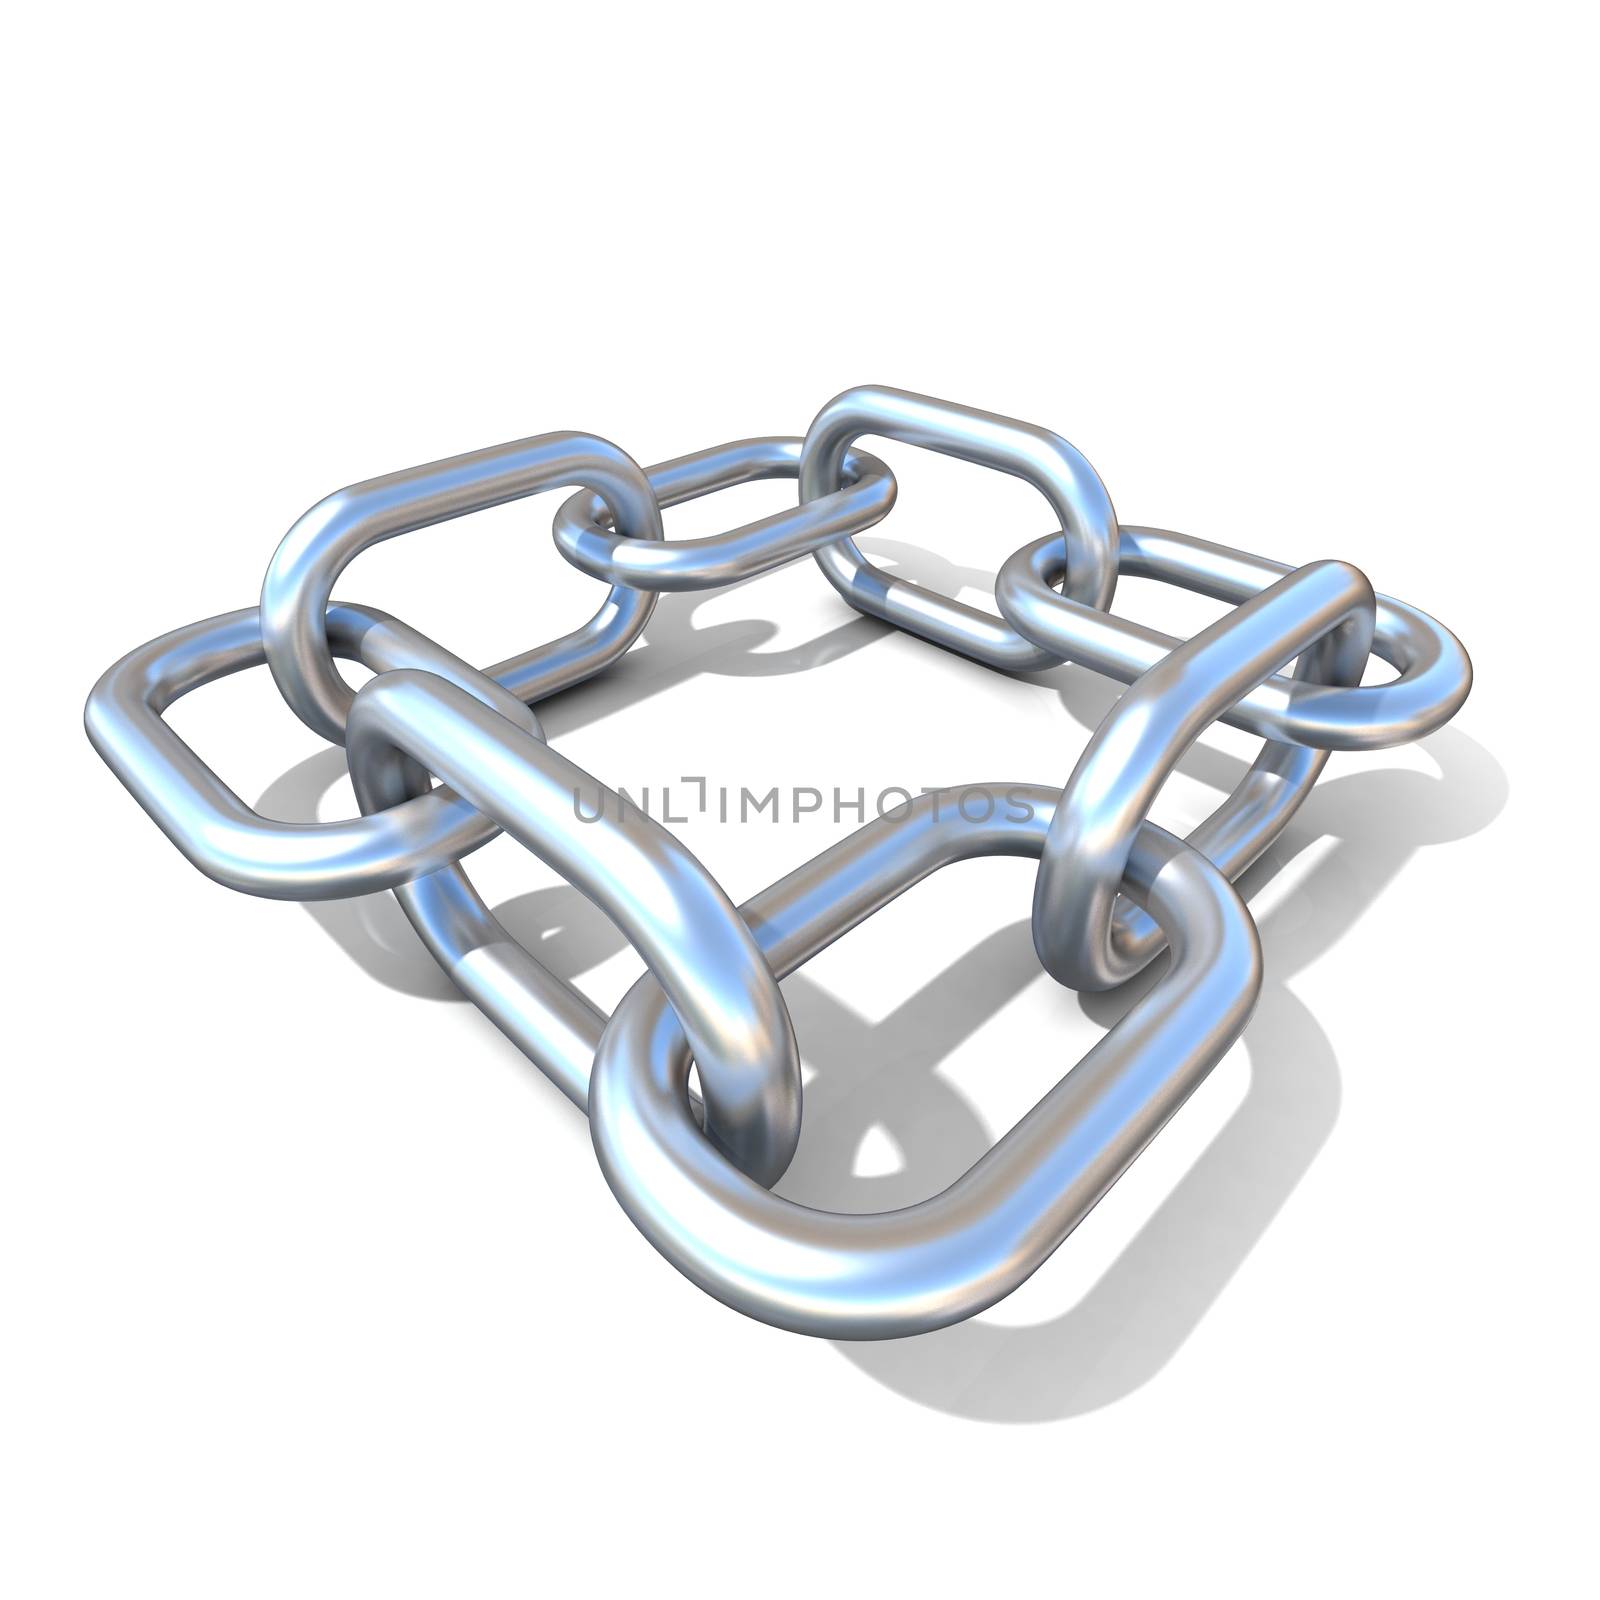 Abstract 3D illustration of a steel chain link by djmilic